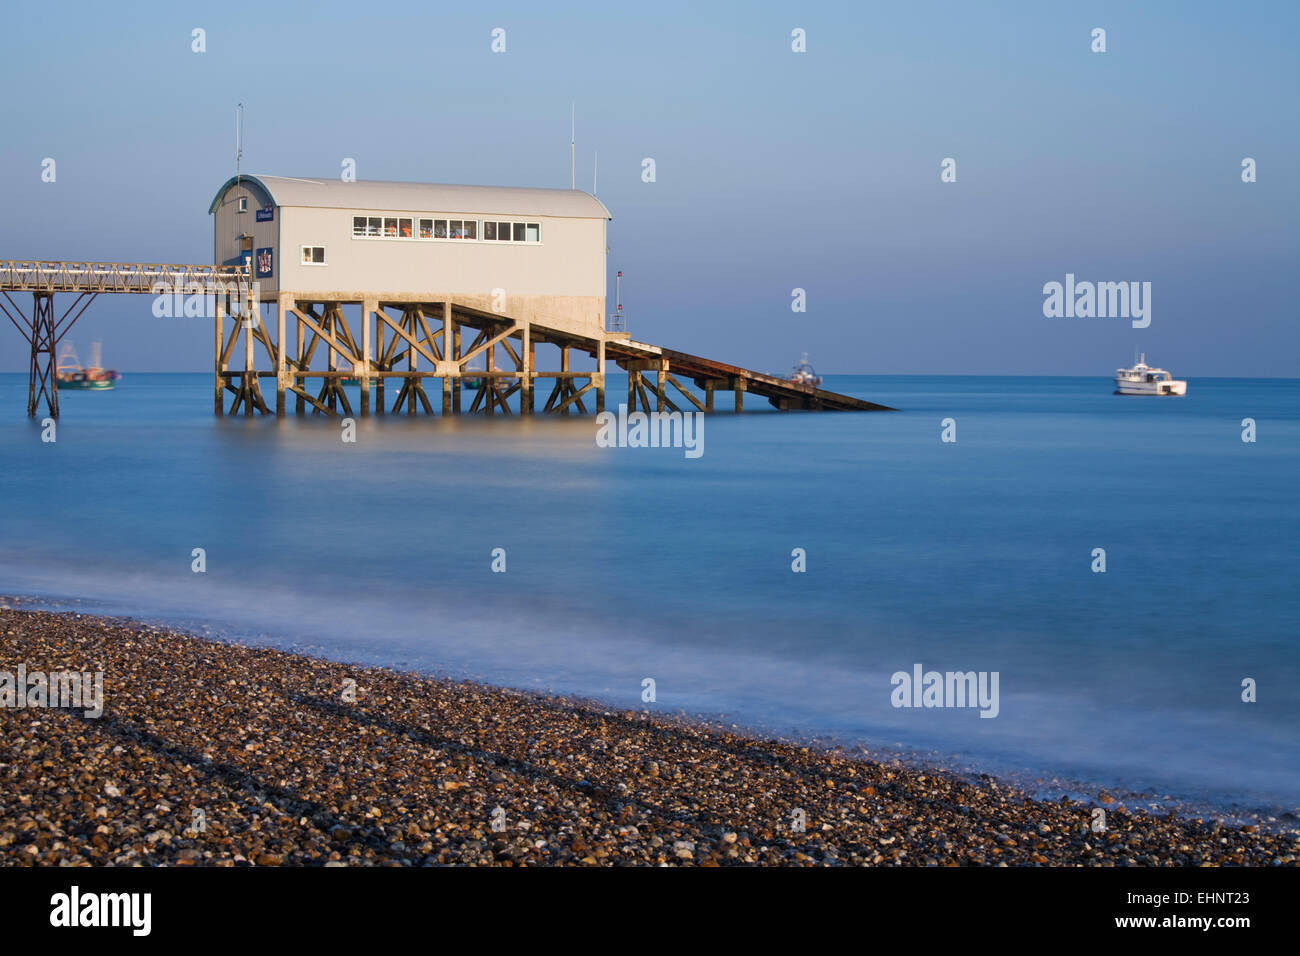 RNLI Lifeboat Station, Selsey, West Sussex, England, UK Stockfoto